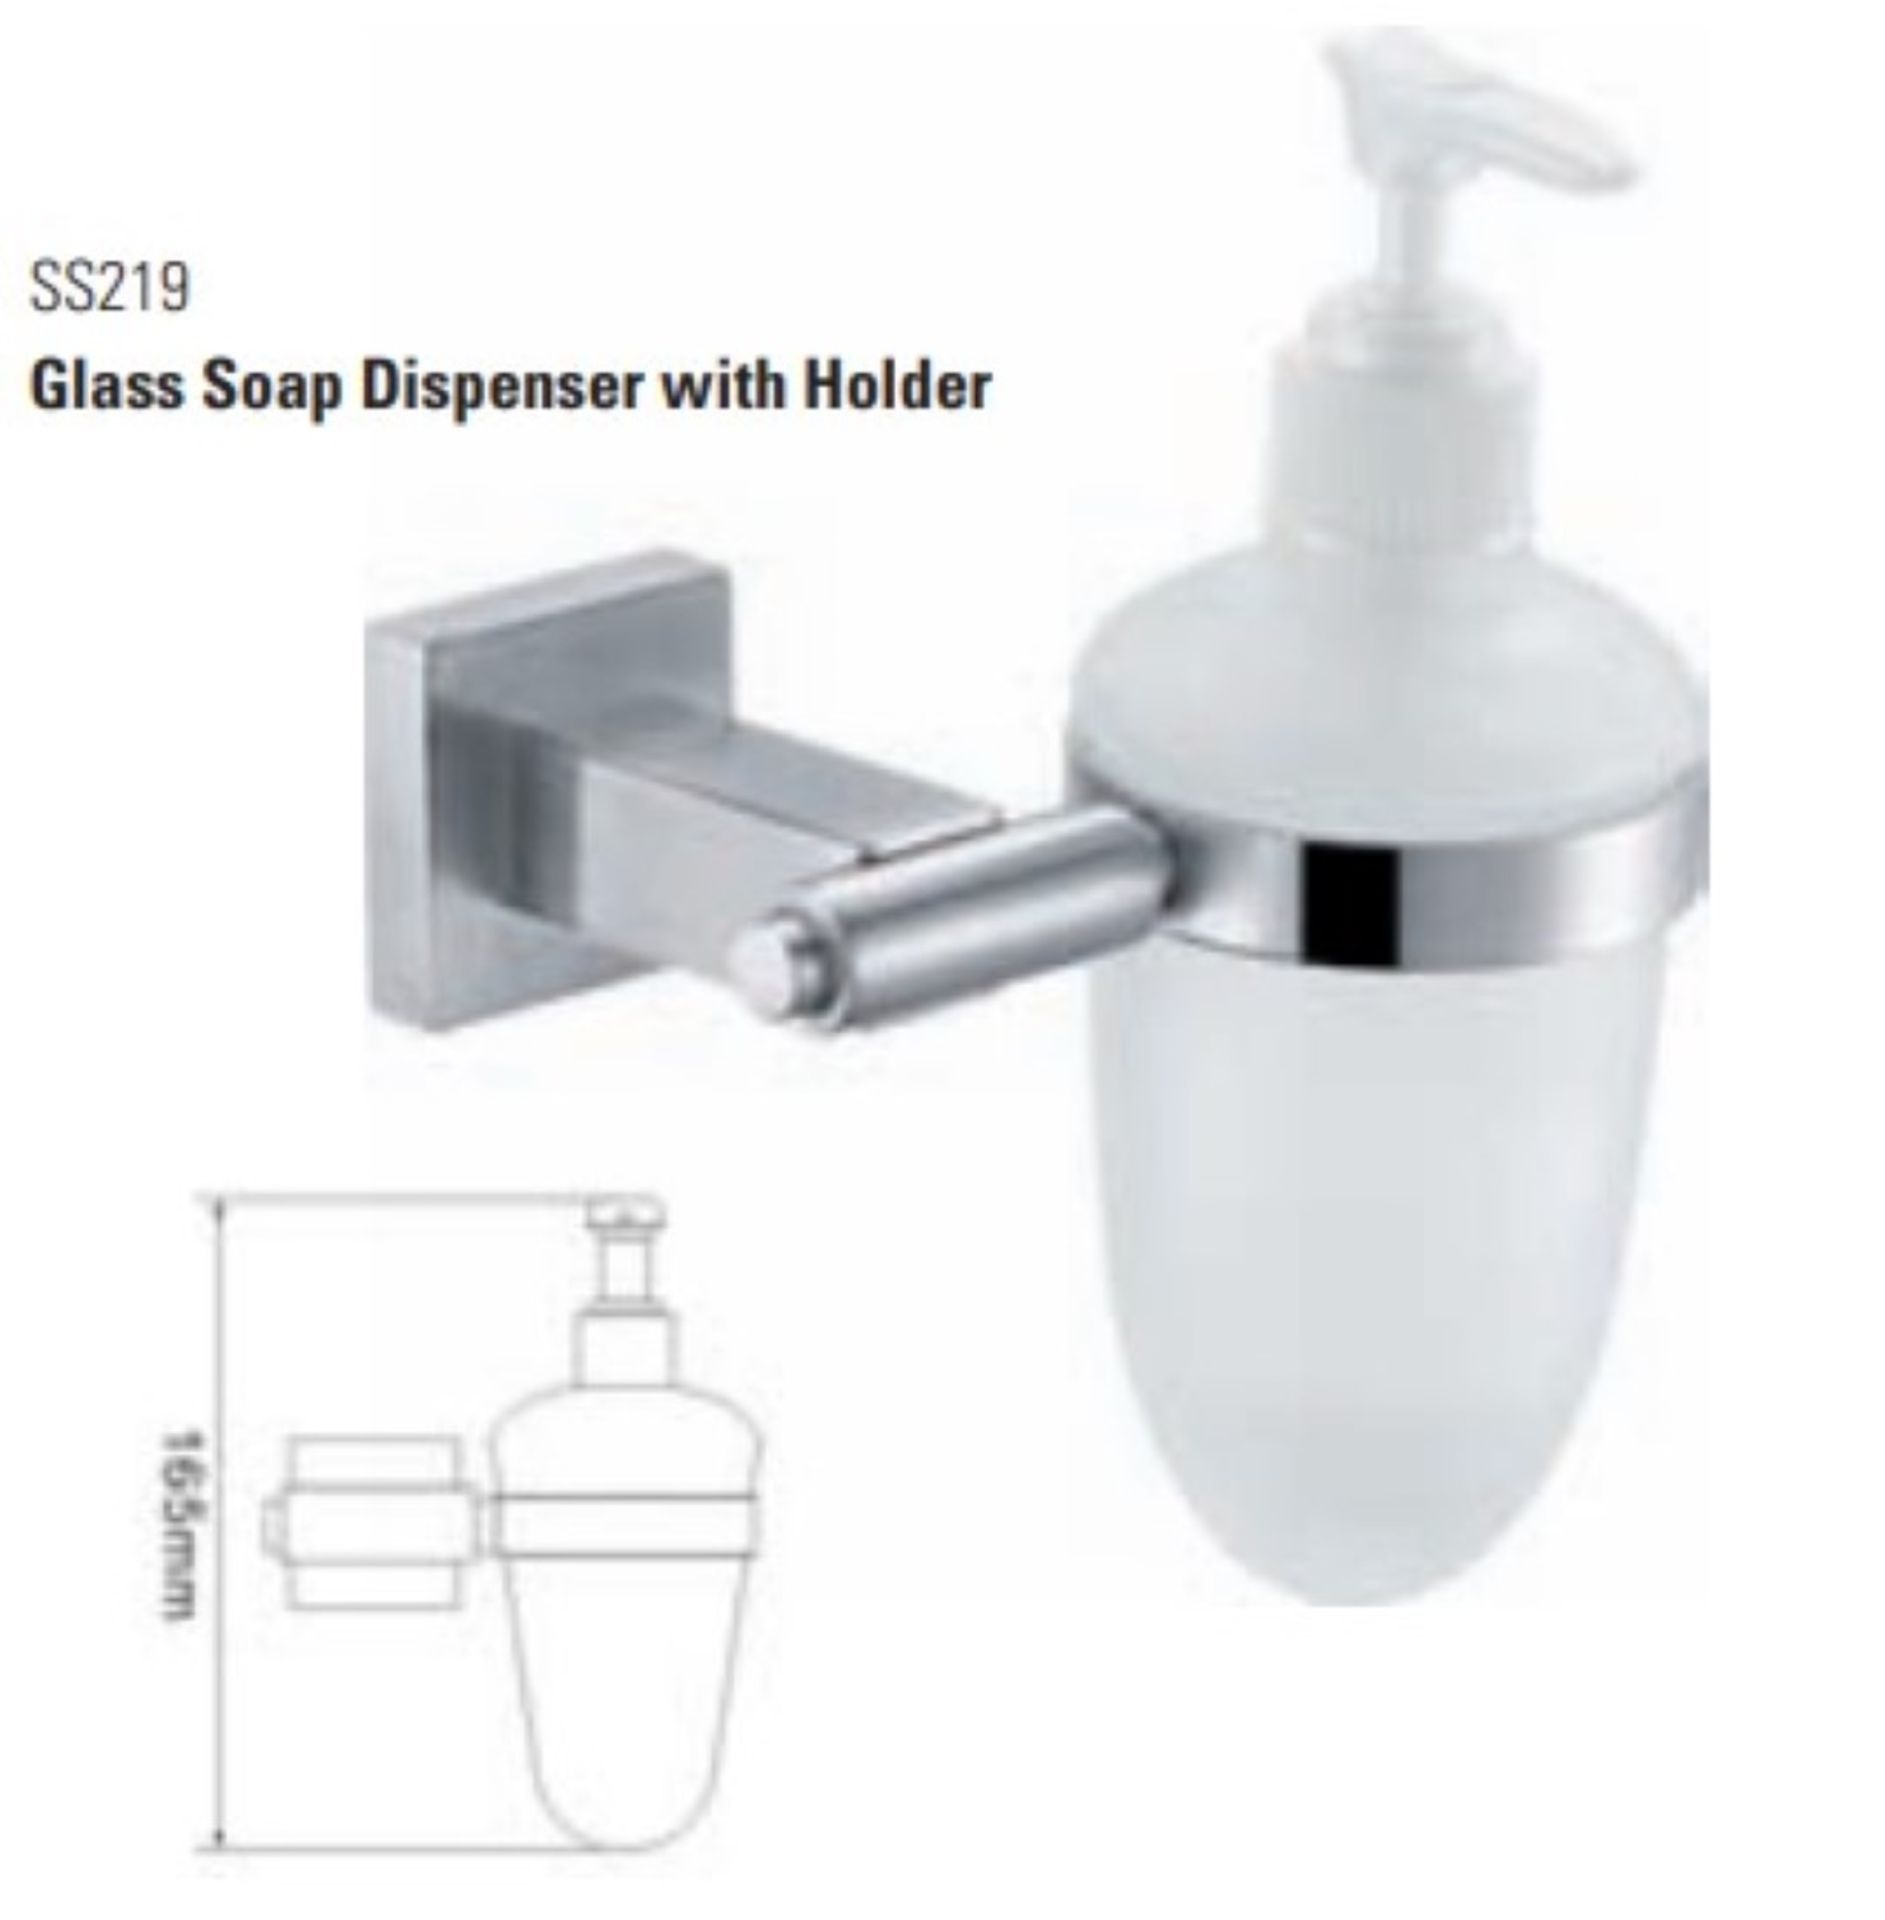 1 x Stonearth Glass Soap Dispenser With Holder - Solid Stainless Steel Bathroom Accessory - New - Image 3 of 3